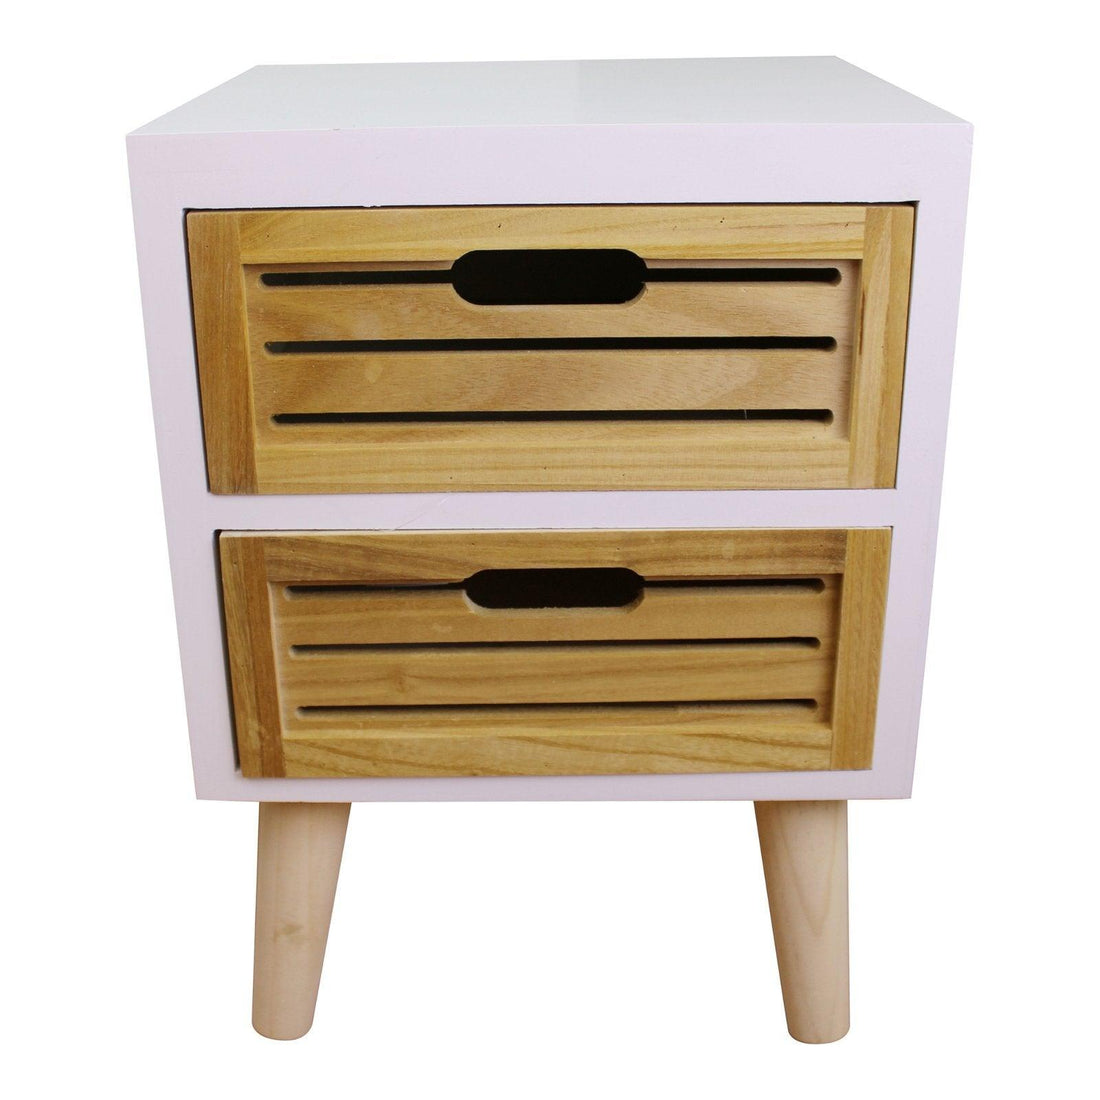 Compact 2 Drawer Unit with Removable Legs - £61.99 - Storage Units 